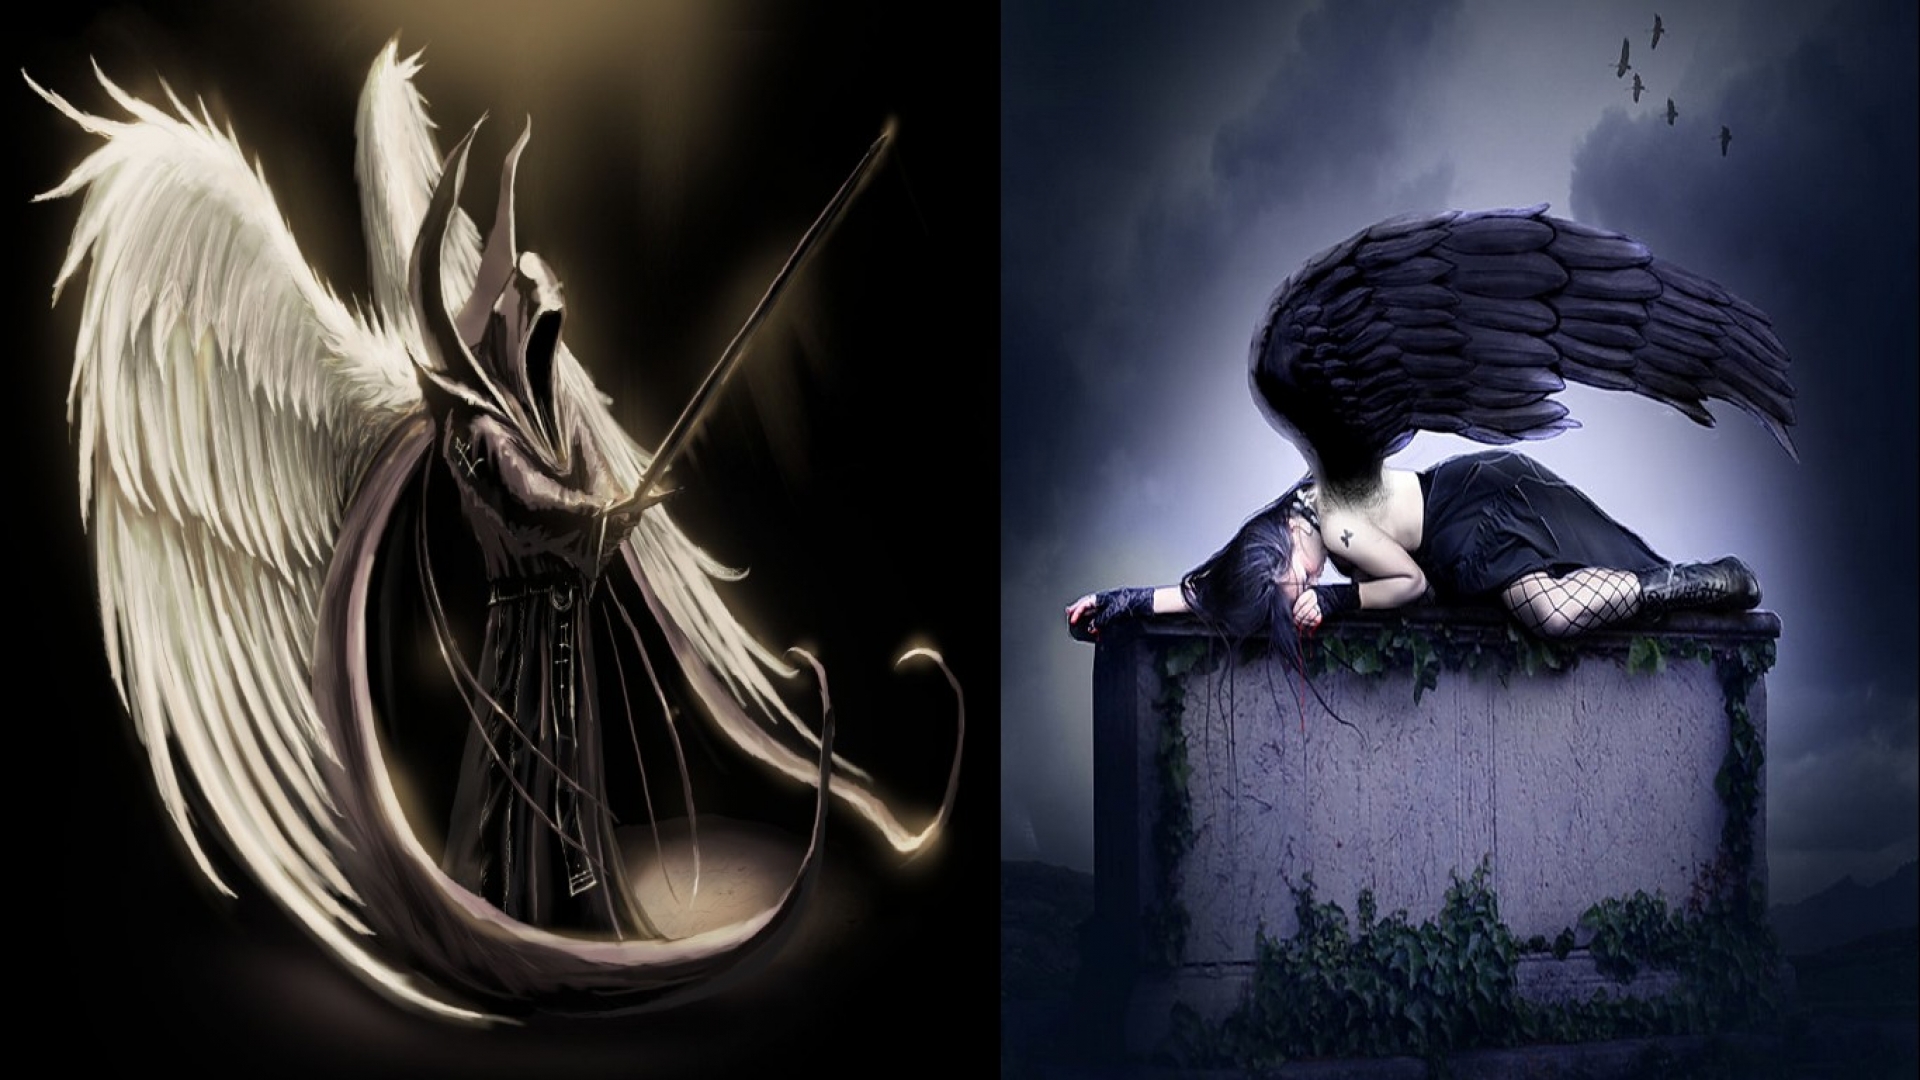 Free Download The Fallen Angel Wallpaper MixHD Wallpapers 1920x1080